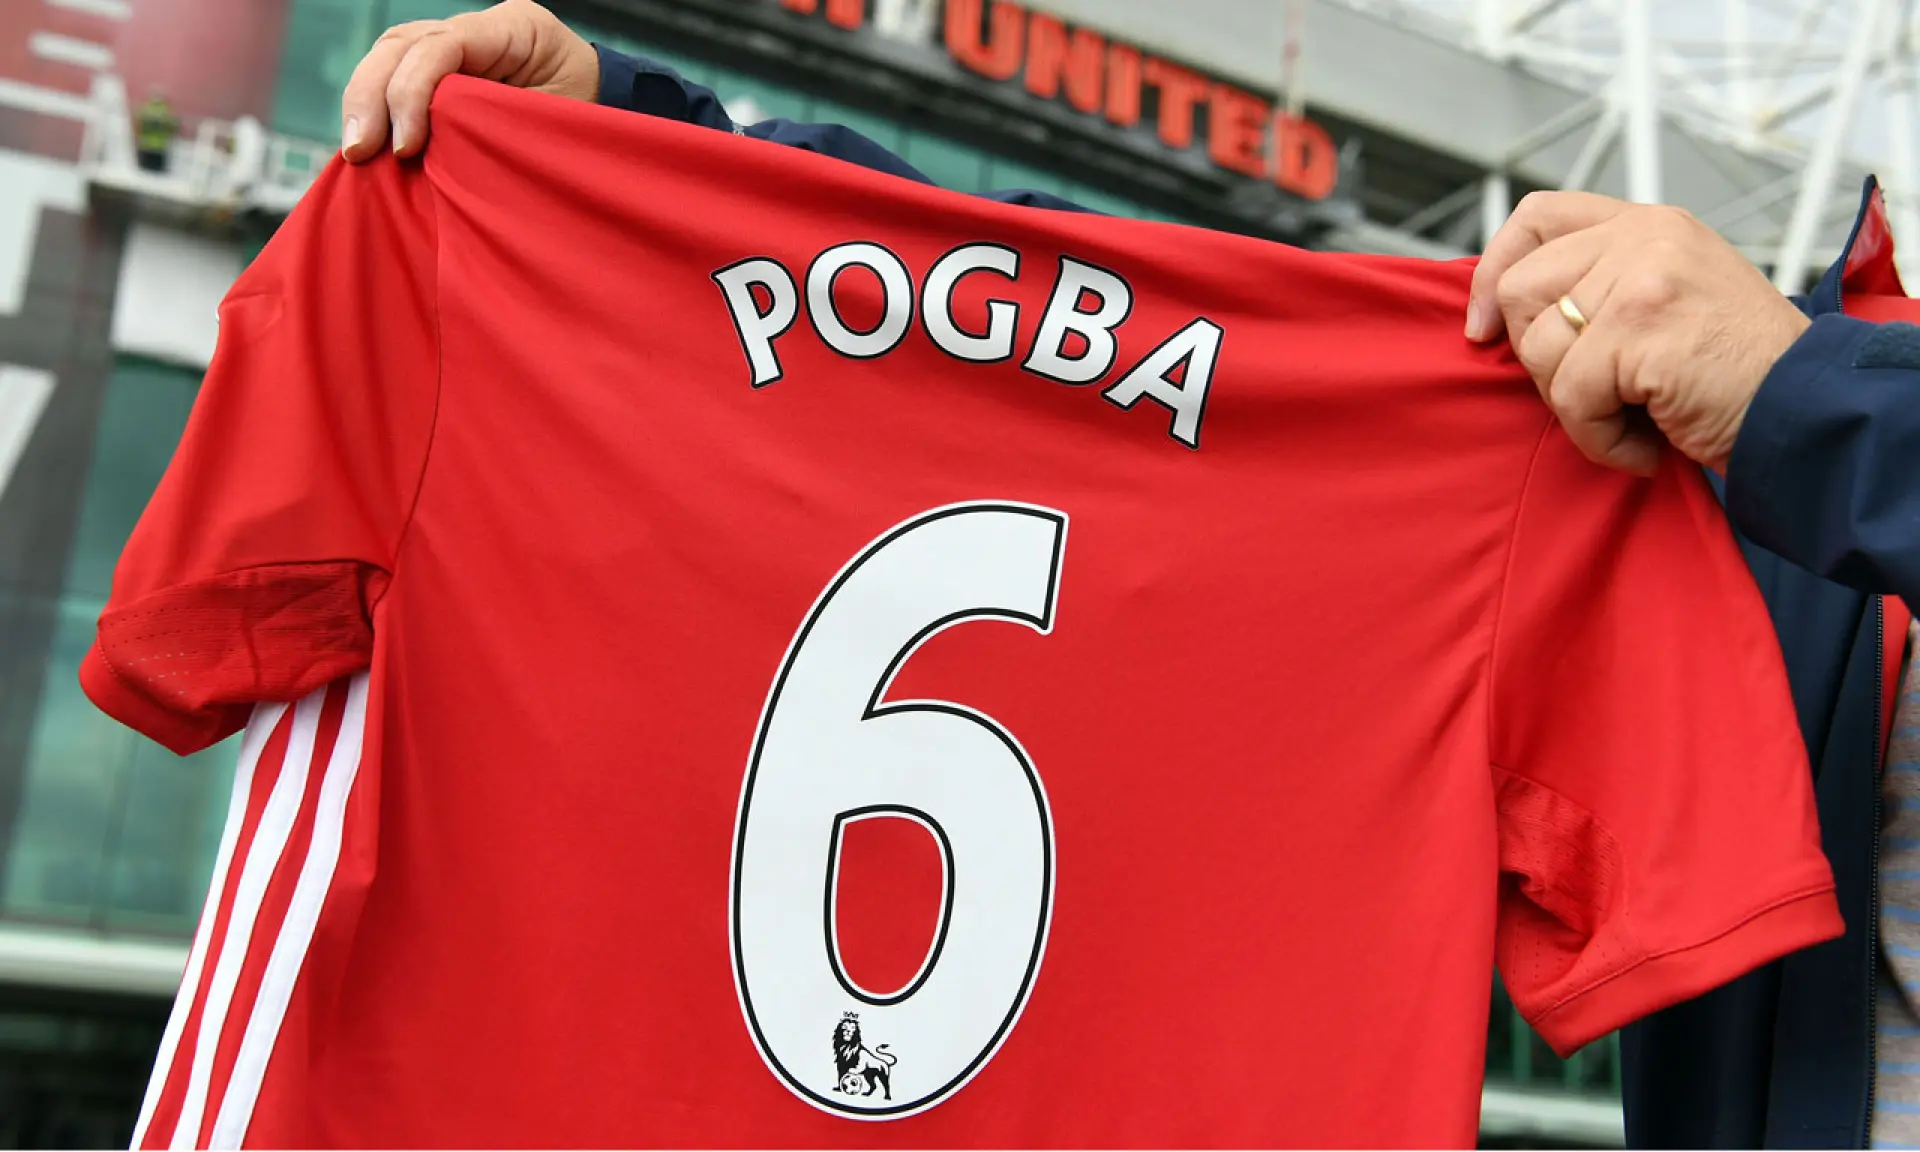 Paul Pogba Manchester United shirt, Manchester United flops